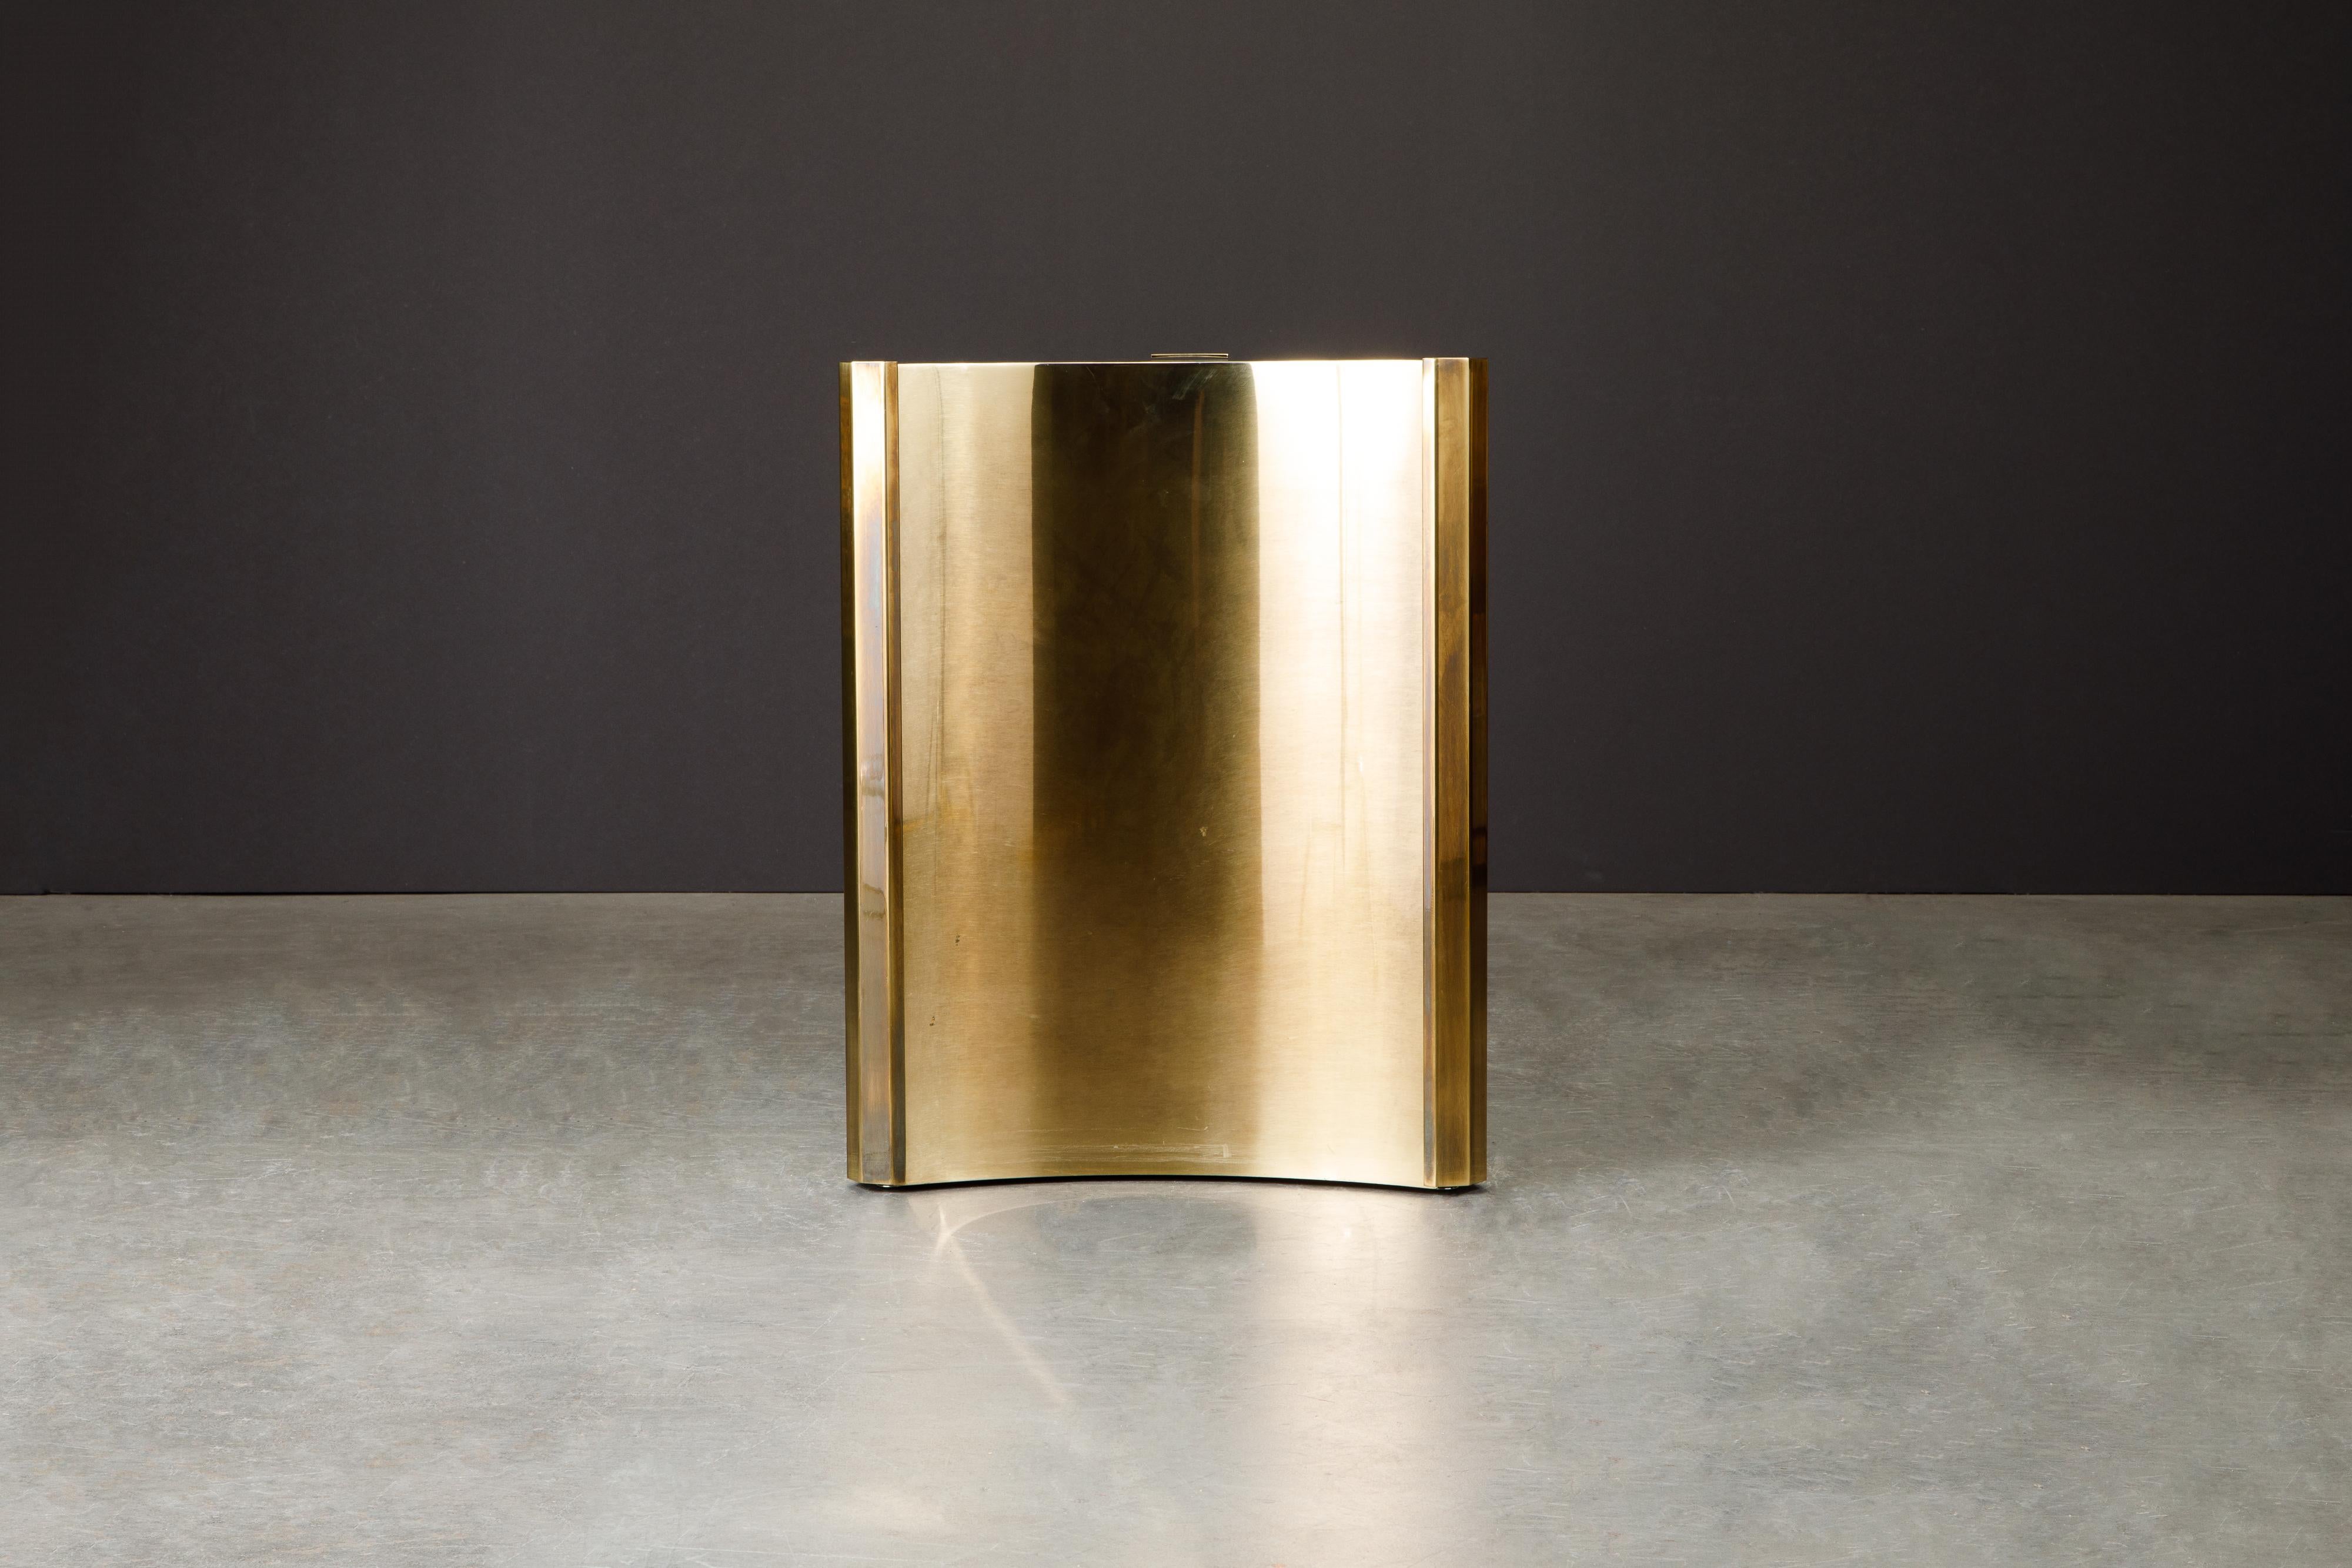 One of the hottest items currently with interior designers are these gleaming brass 'Trilobi' Mastercraft dining table base, which also work excellent for a desk, feature a hefty triangular design with sculpted ends. The gorgeous brass displays